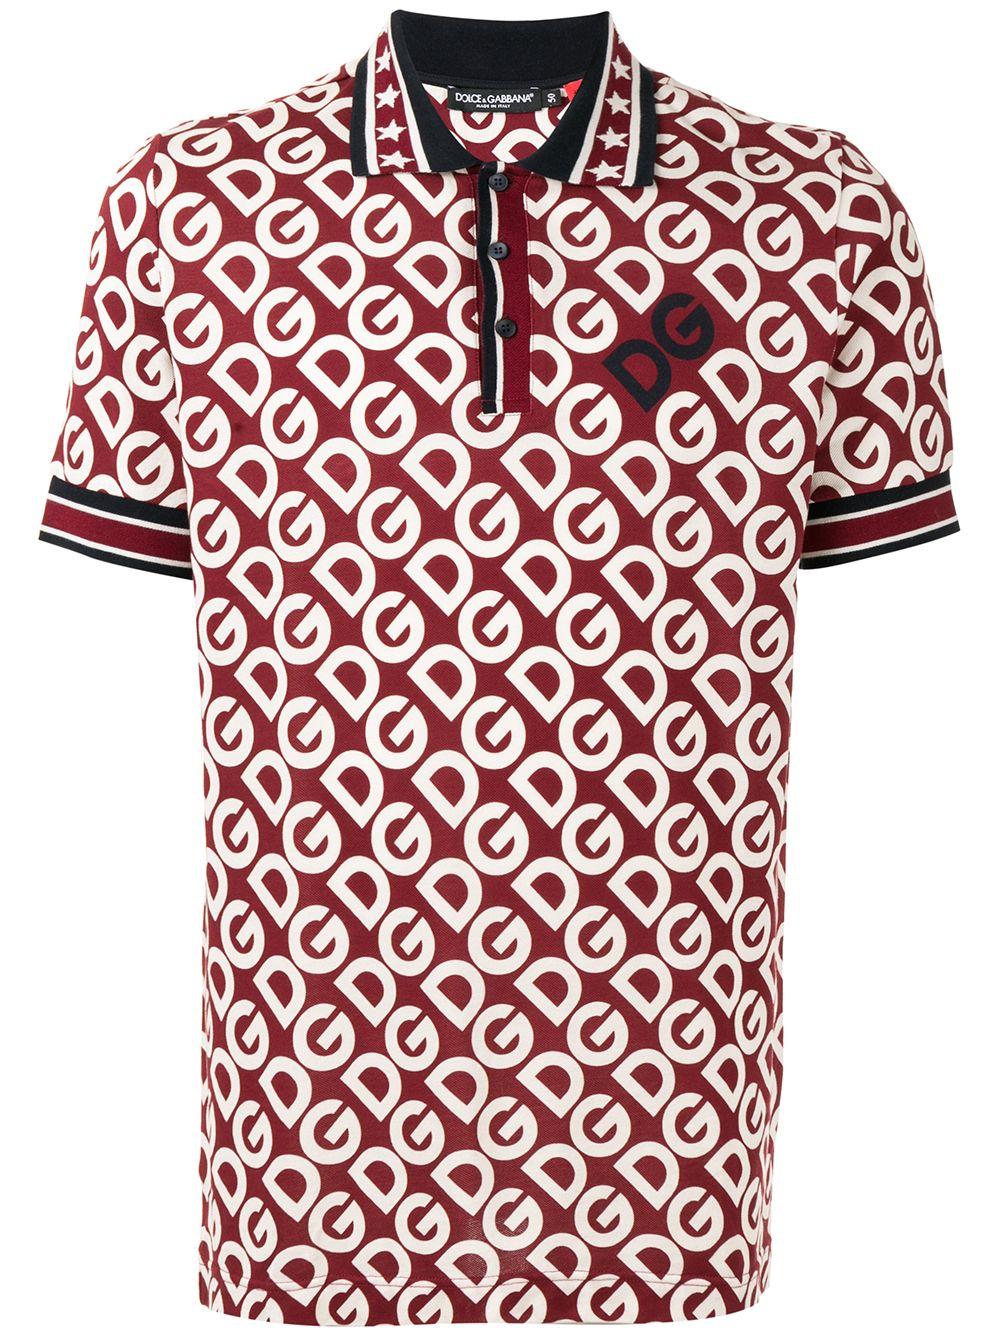 Dolce & Gabbana Mania Polo in Red for Men - Lyst